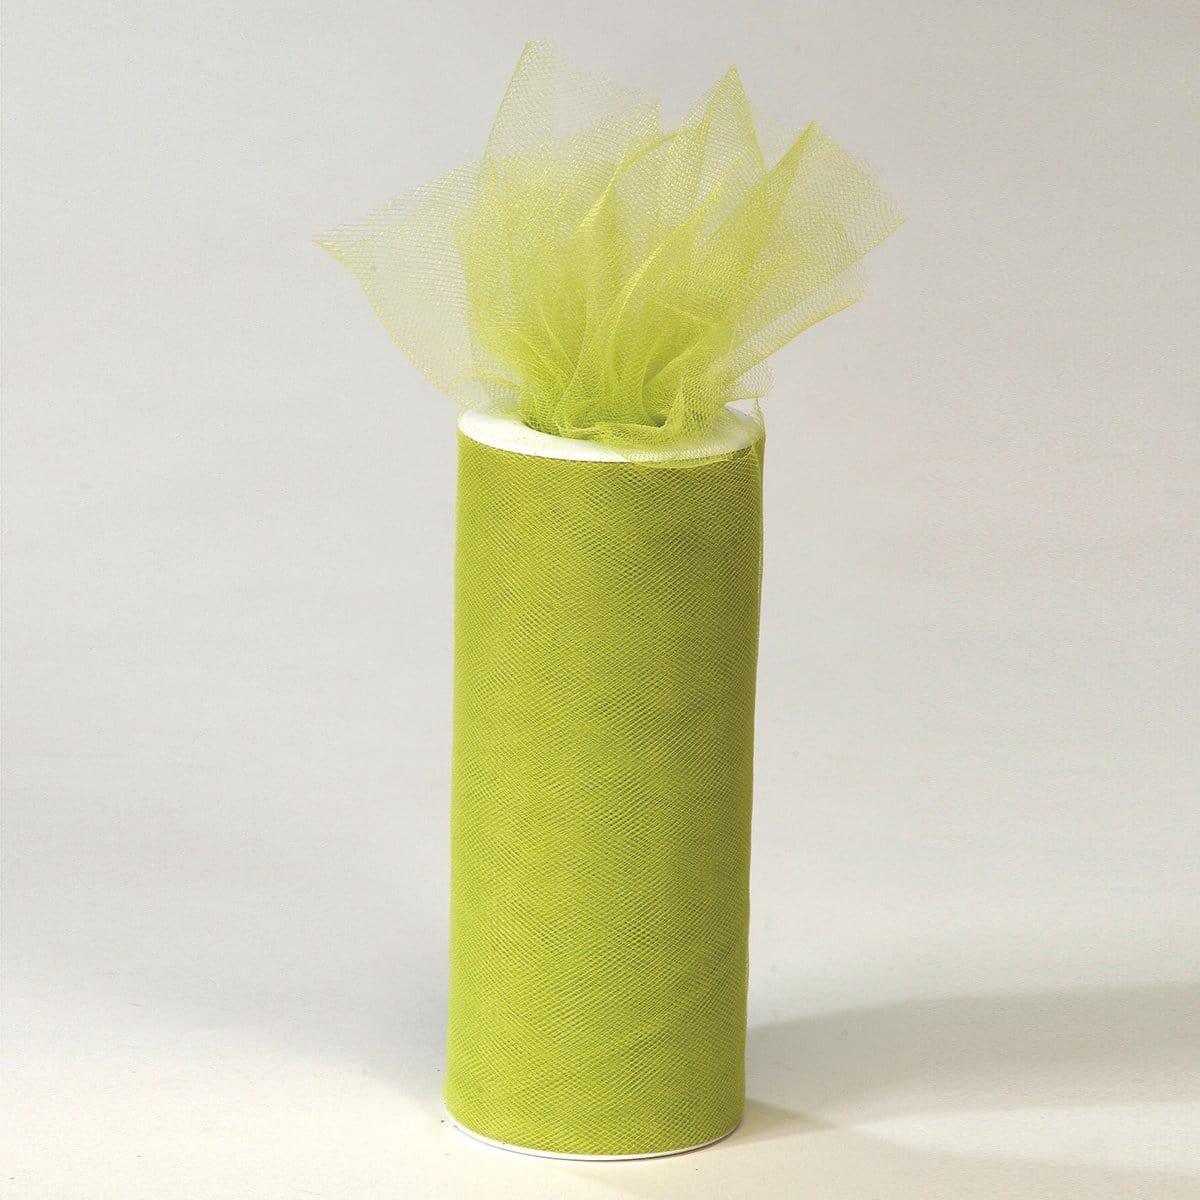 Buy Decorations Tulle Roll - Apple Green 6.5 in x 25 yds sold at Party Expert